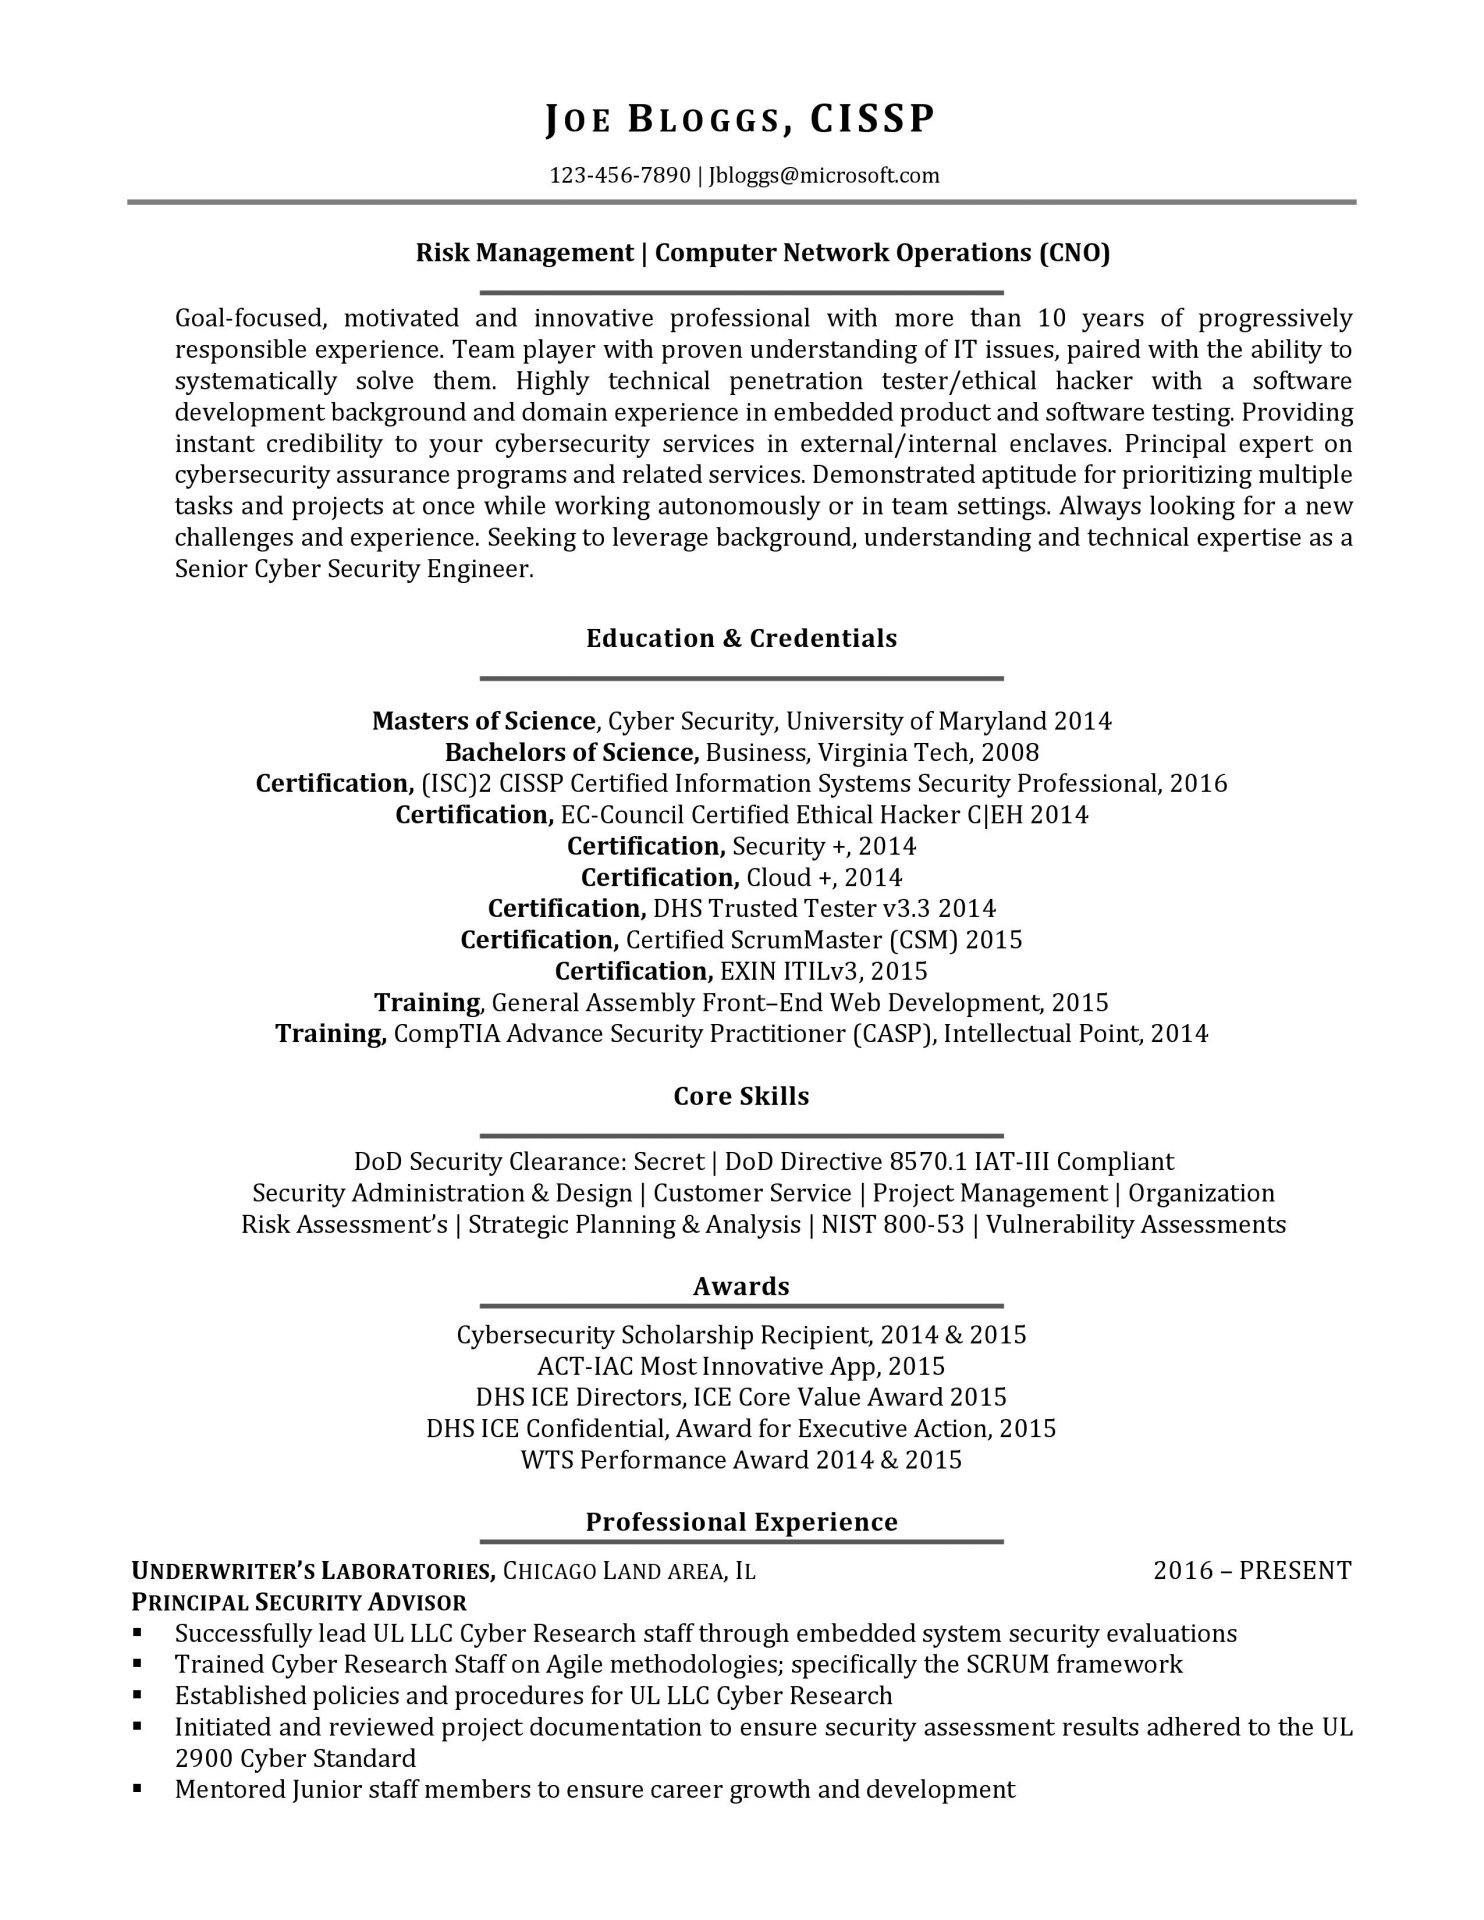 Sample Resume with Comp Tia Scredentials Sample Inspiring Resumes – Intellectual Point